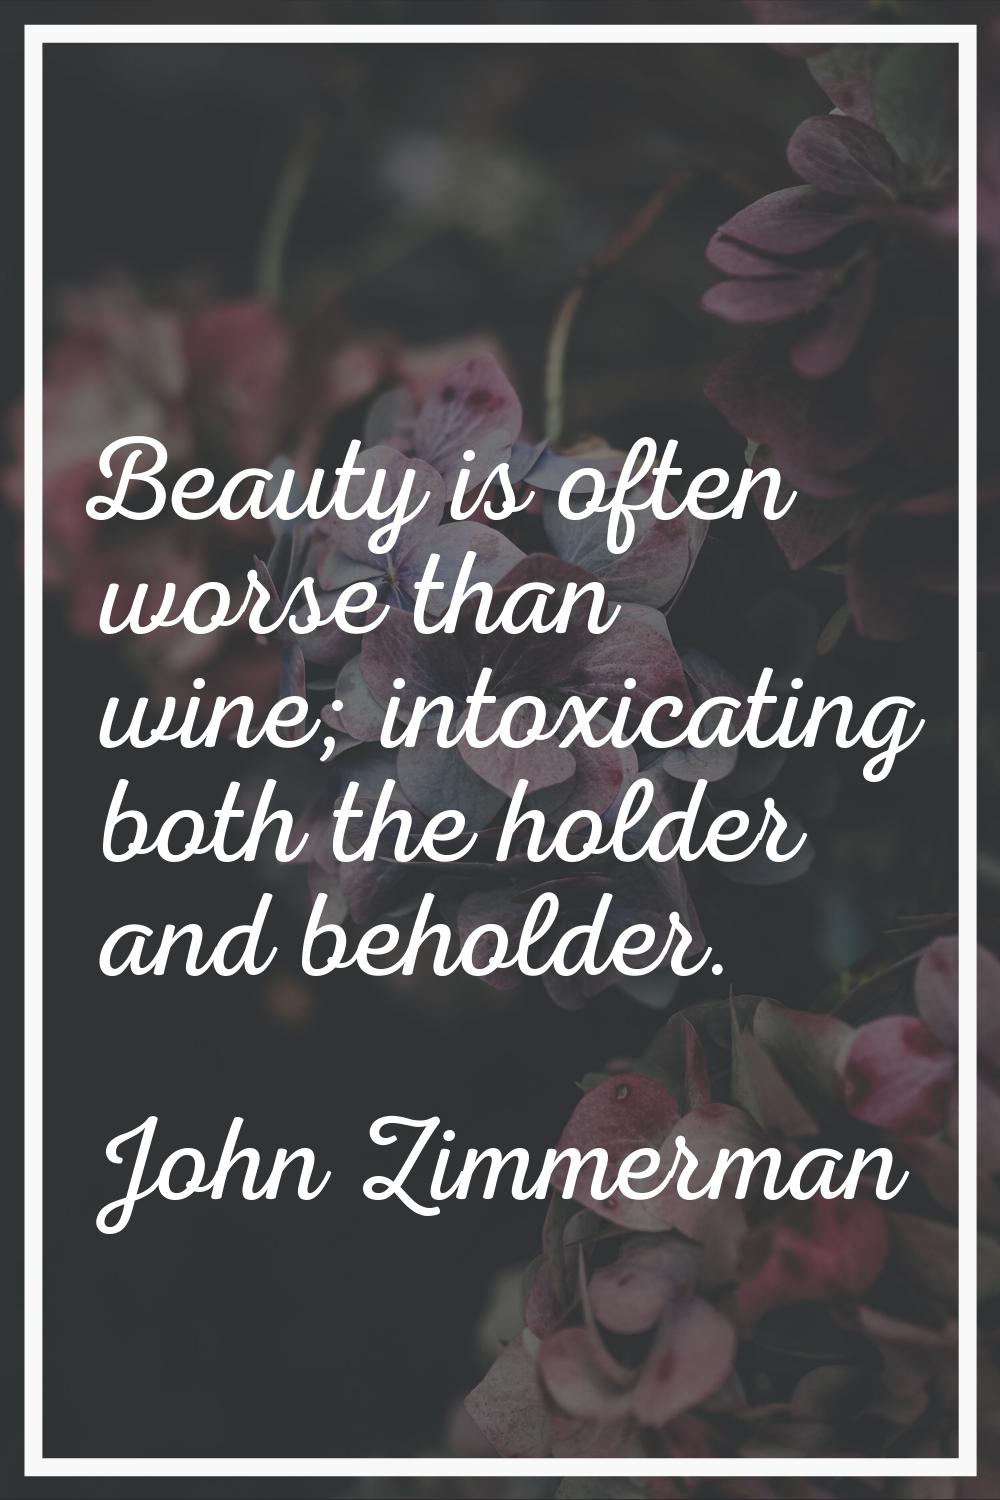 Beauty is often worse than wine; intoxicating both the holder and beholder.